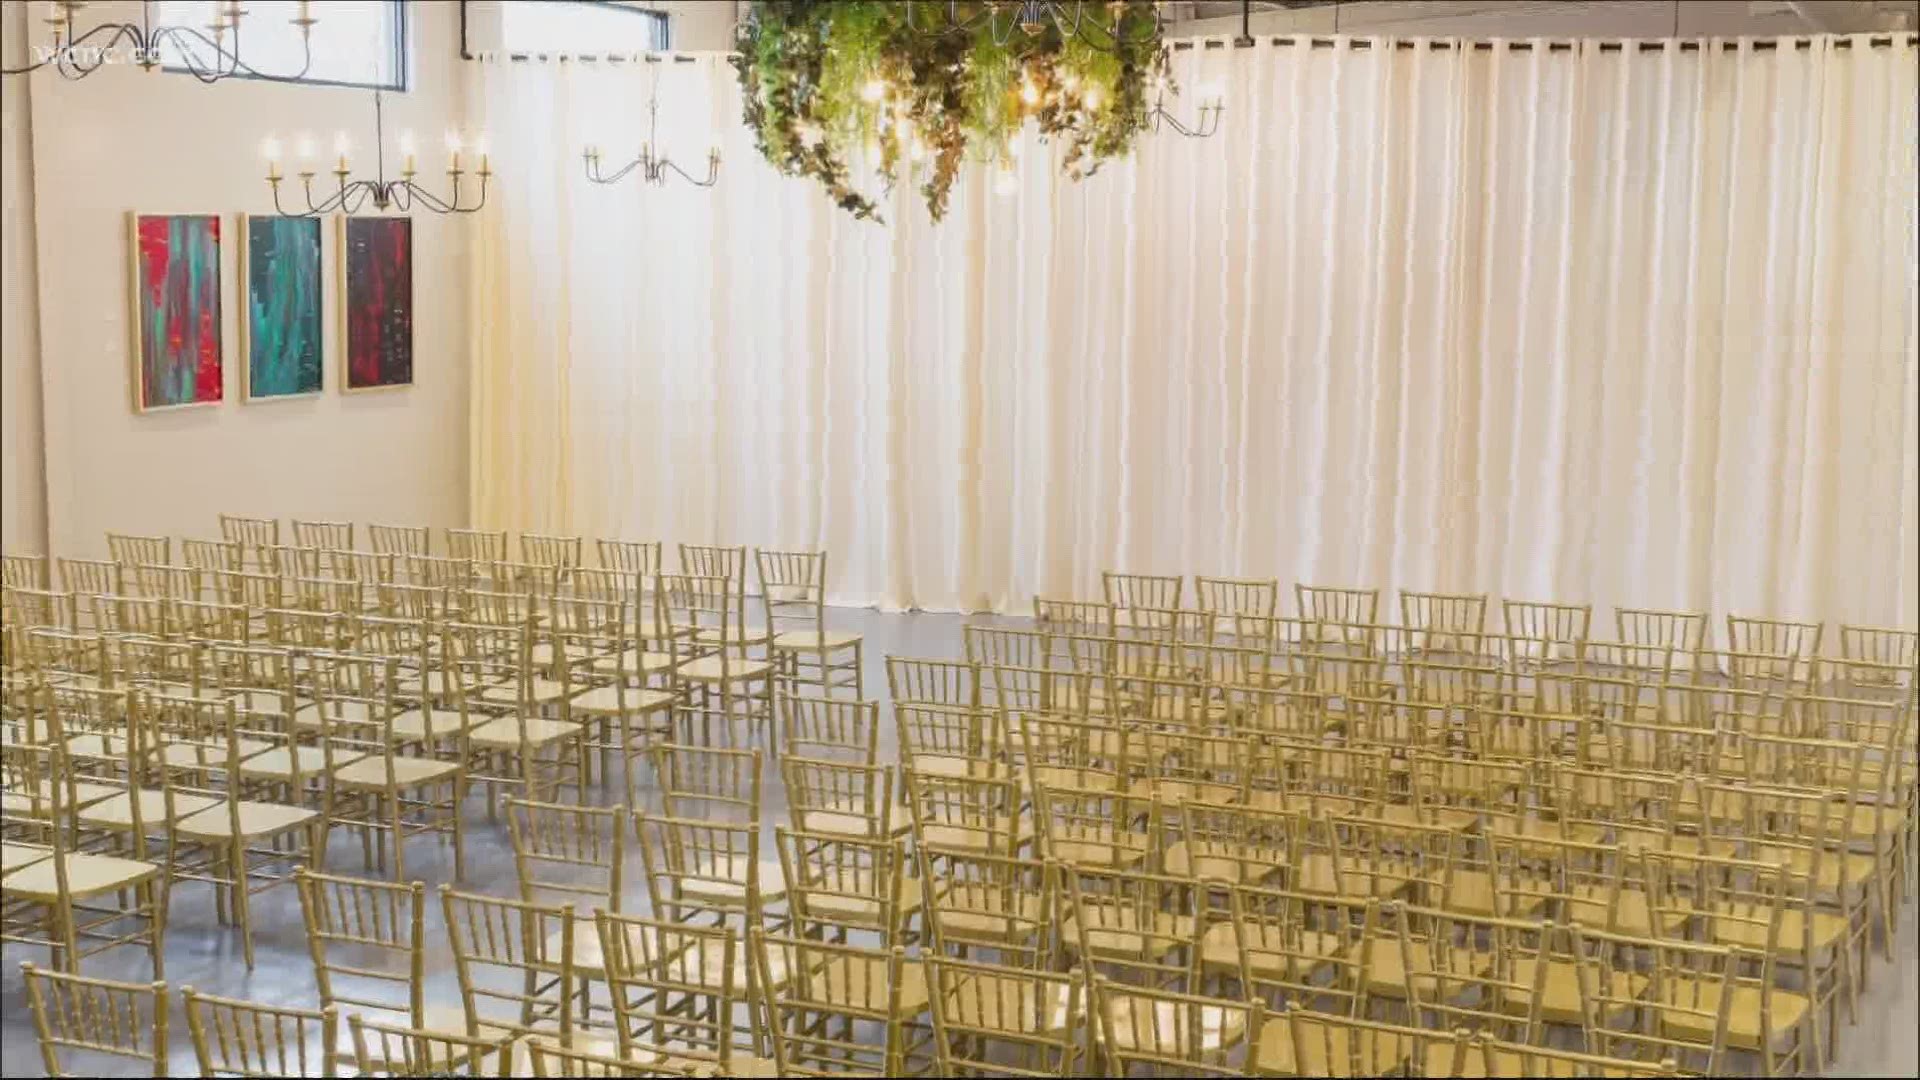 The Collectors Room typically hosts events that can fit around 400 people in the venue.